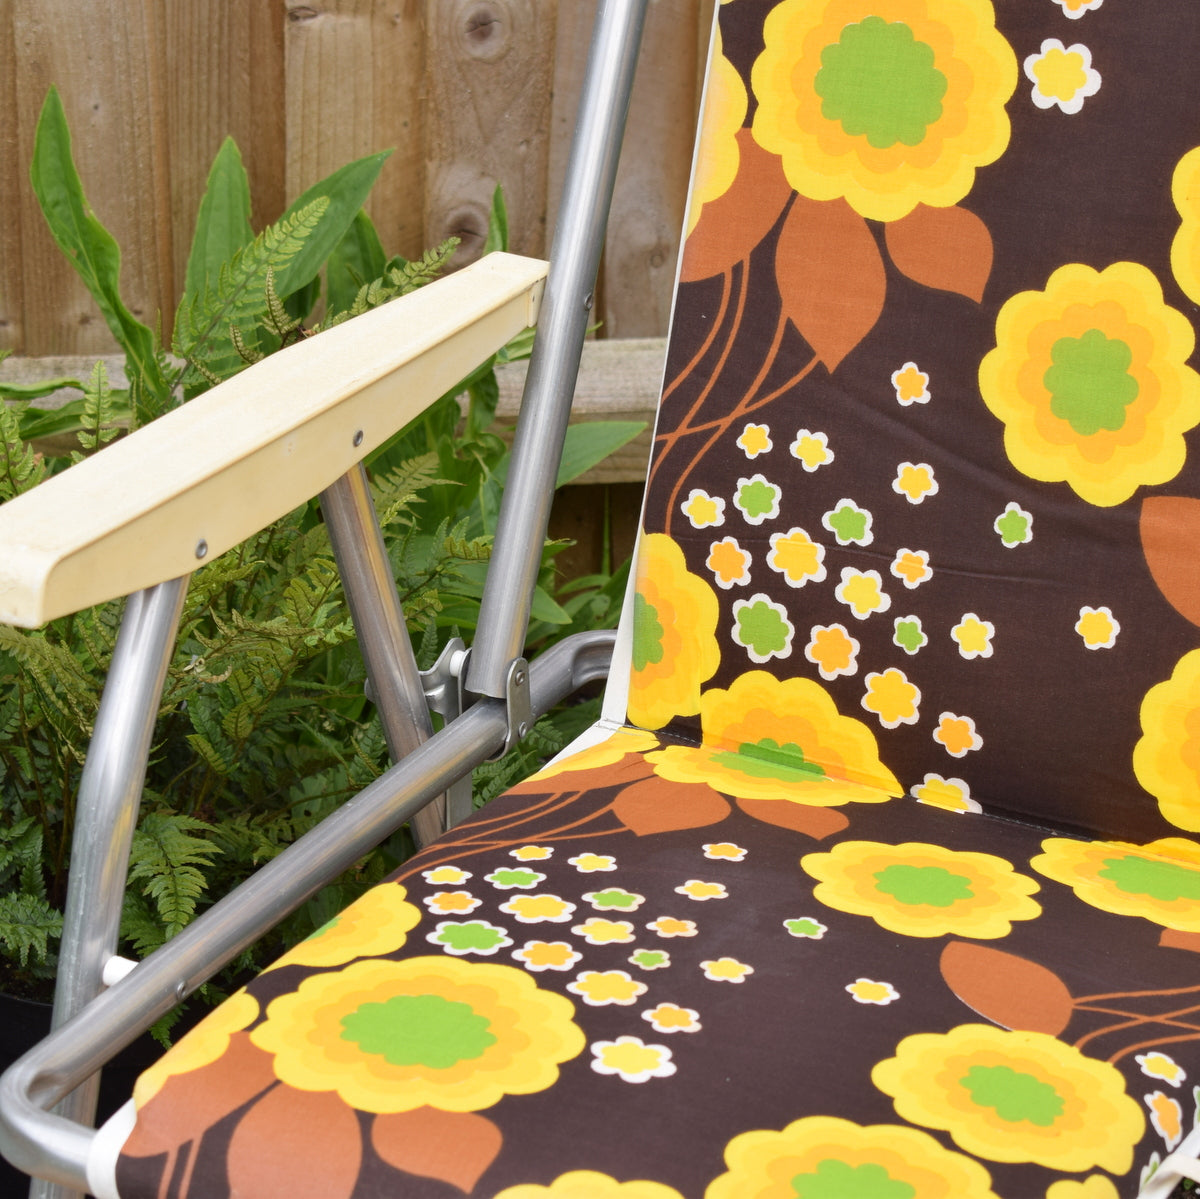 Vintage 1960s Folding, Padded Garden Chair - Flower Power - Yellow & Brown